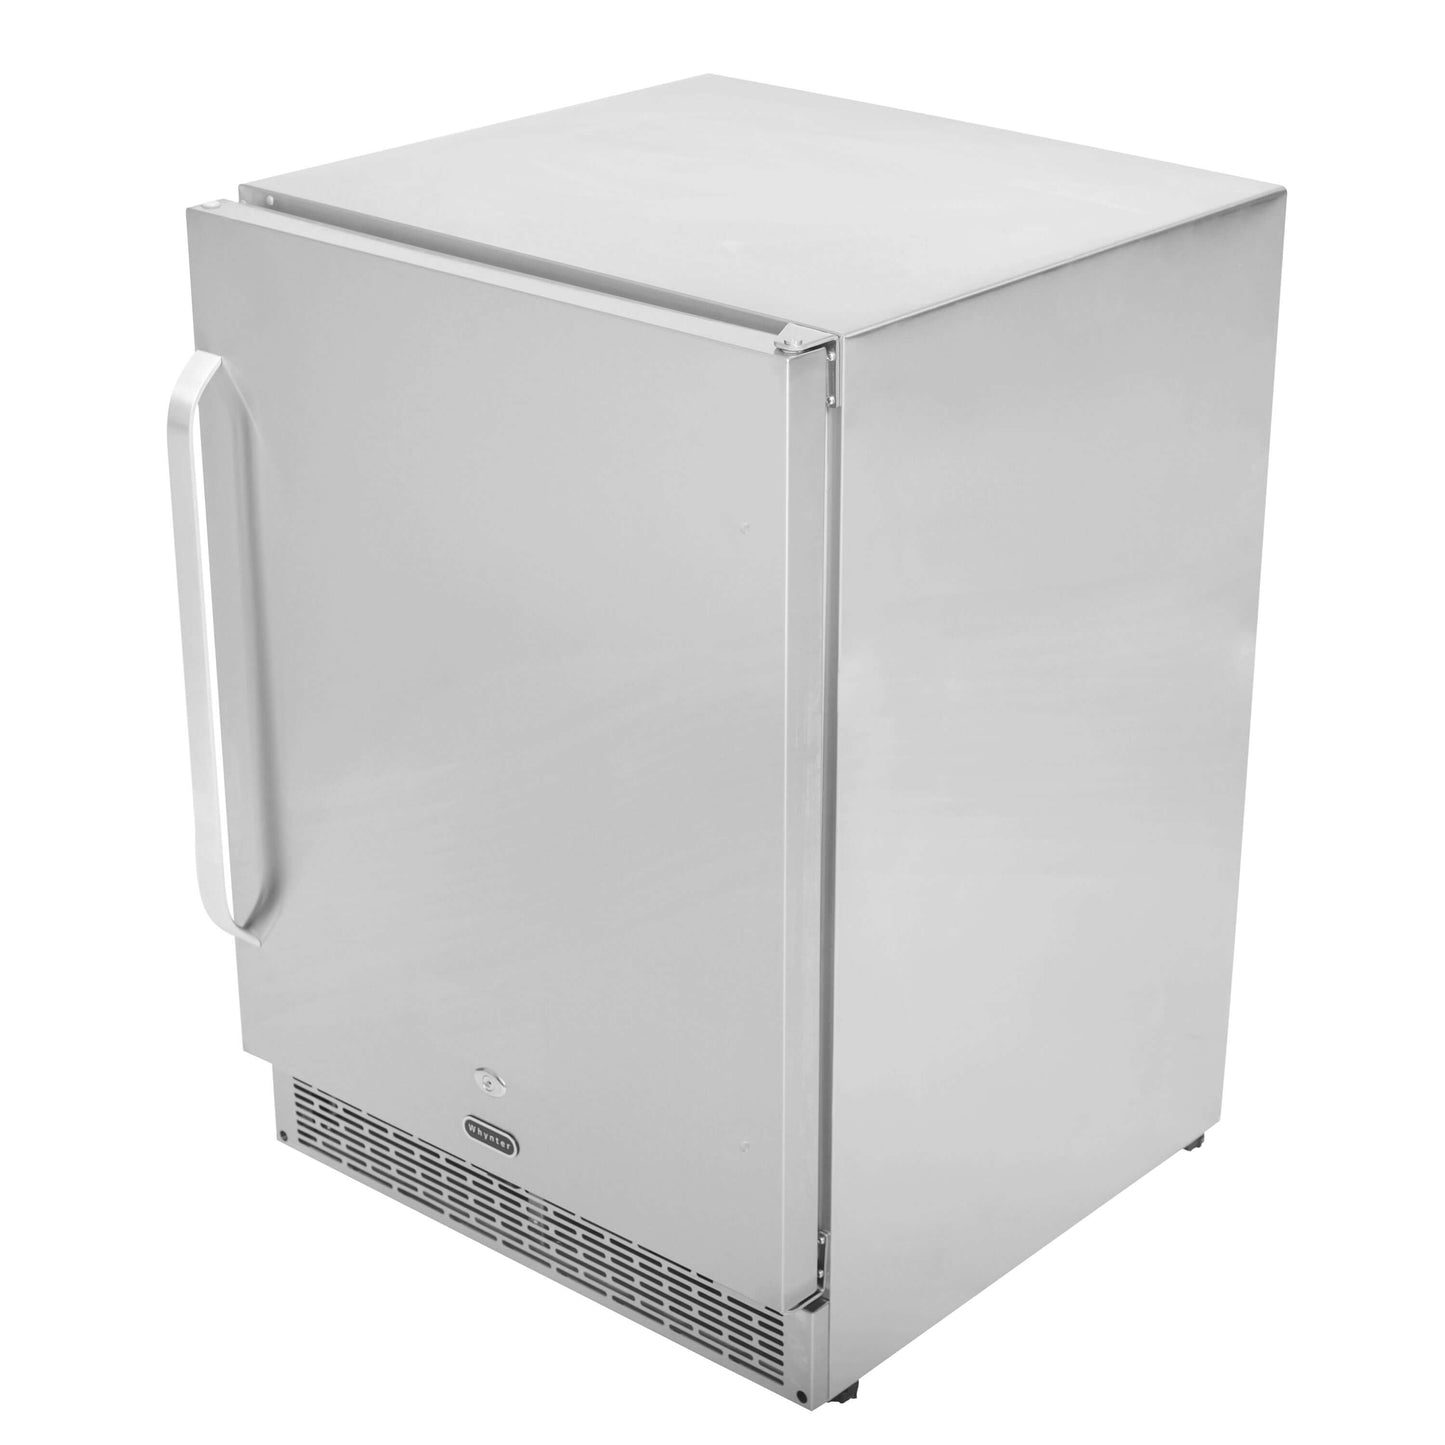 Whynter BOR-53024-SSW/BOR-53024-SSWa Energy Star 24″ Built-in Outdoor 5.3 cu.ft. Beverage Refrigerator Cooler Full Stainless Steel Exterior with Lock and Optional Caster Wheels